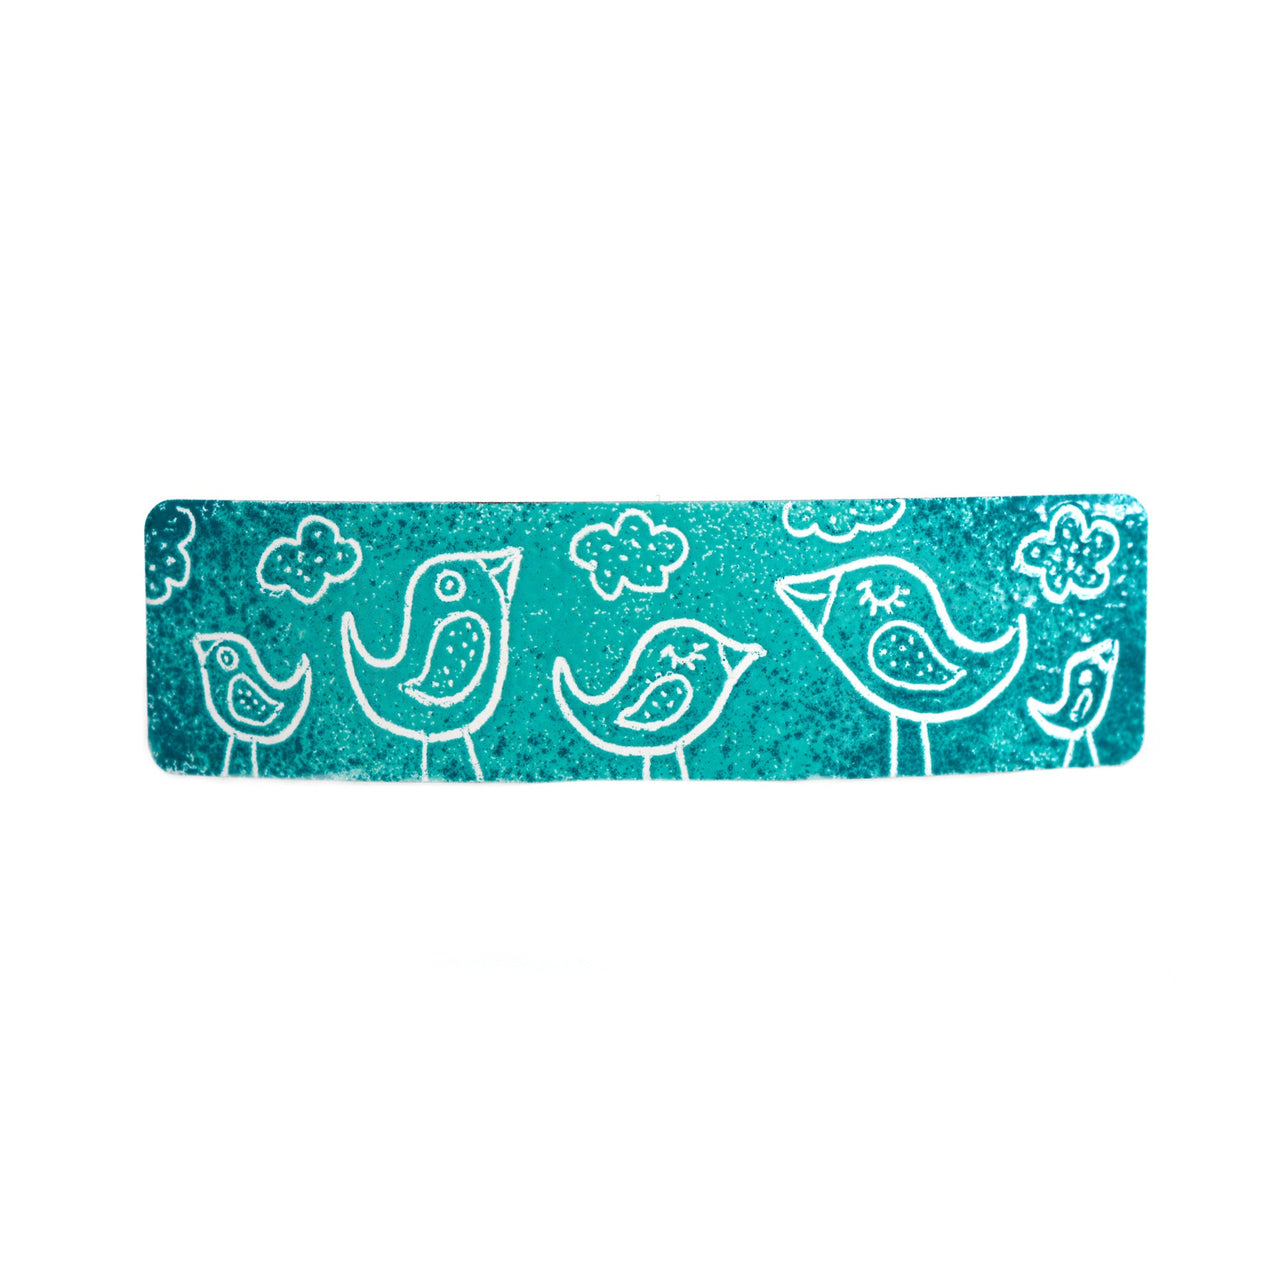 Five Birds and Clouds Ponytail Holder